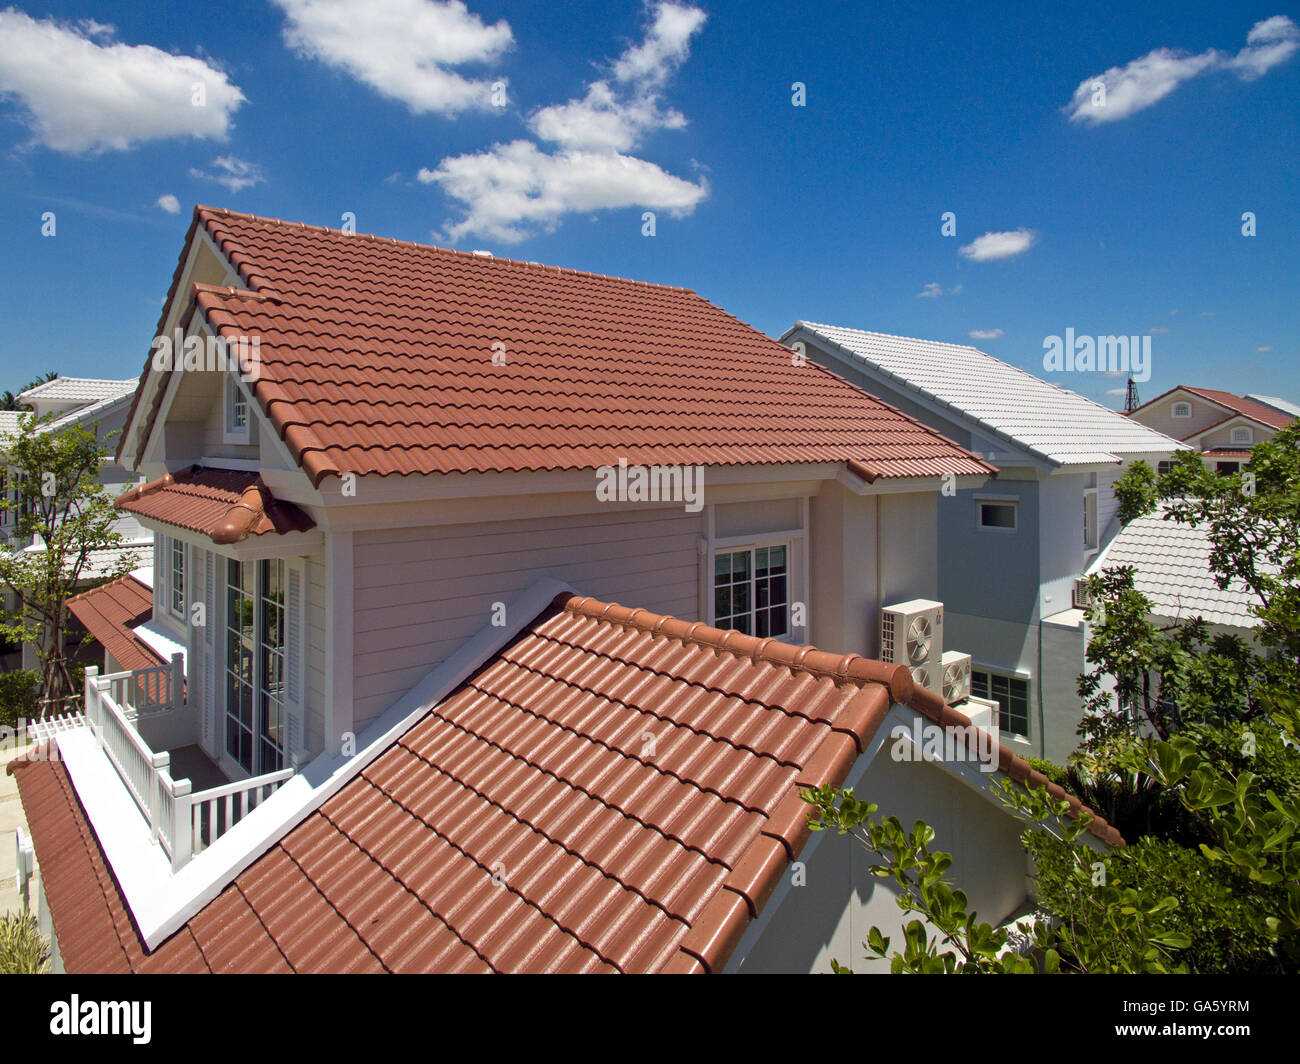 House Roofs tiles, new styles and colors Stock Photo